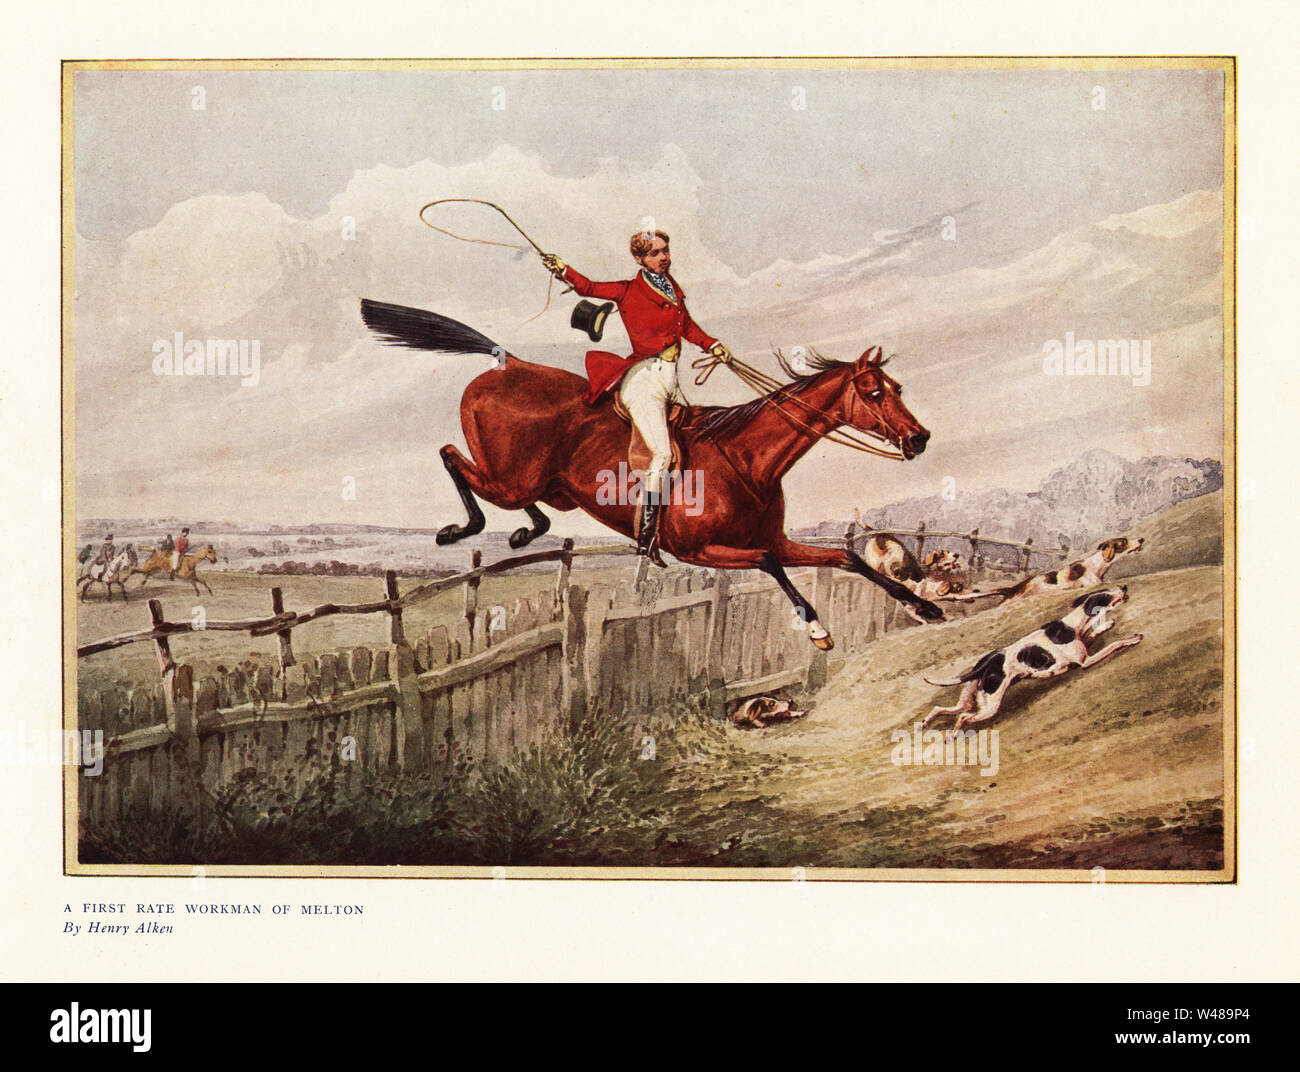 A first rate workman of Melton. Fox hunter in scarlet jacket on horseback jumping over a fence, while fox hounds run alongside, 1837. Color print after a drawing by Henry Alken in Ralph Nevill’s Old Sporting Prints, The Connoisseur Magazine, London, 1908. Stock Photo